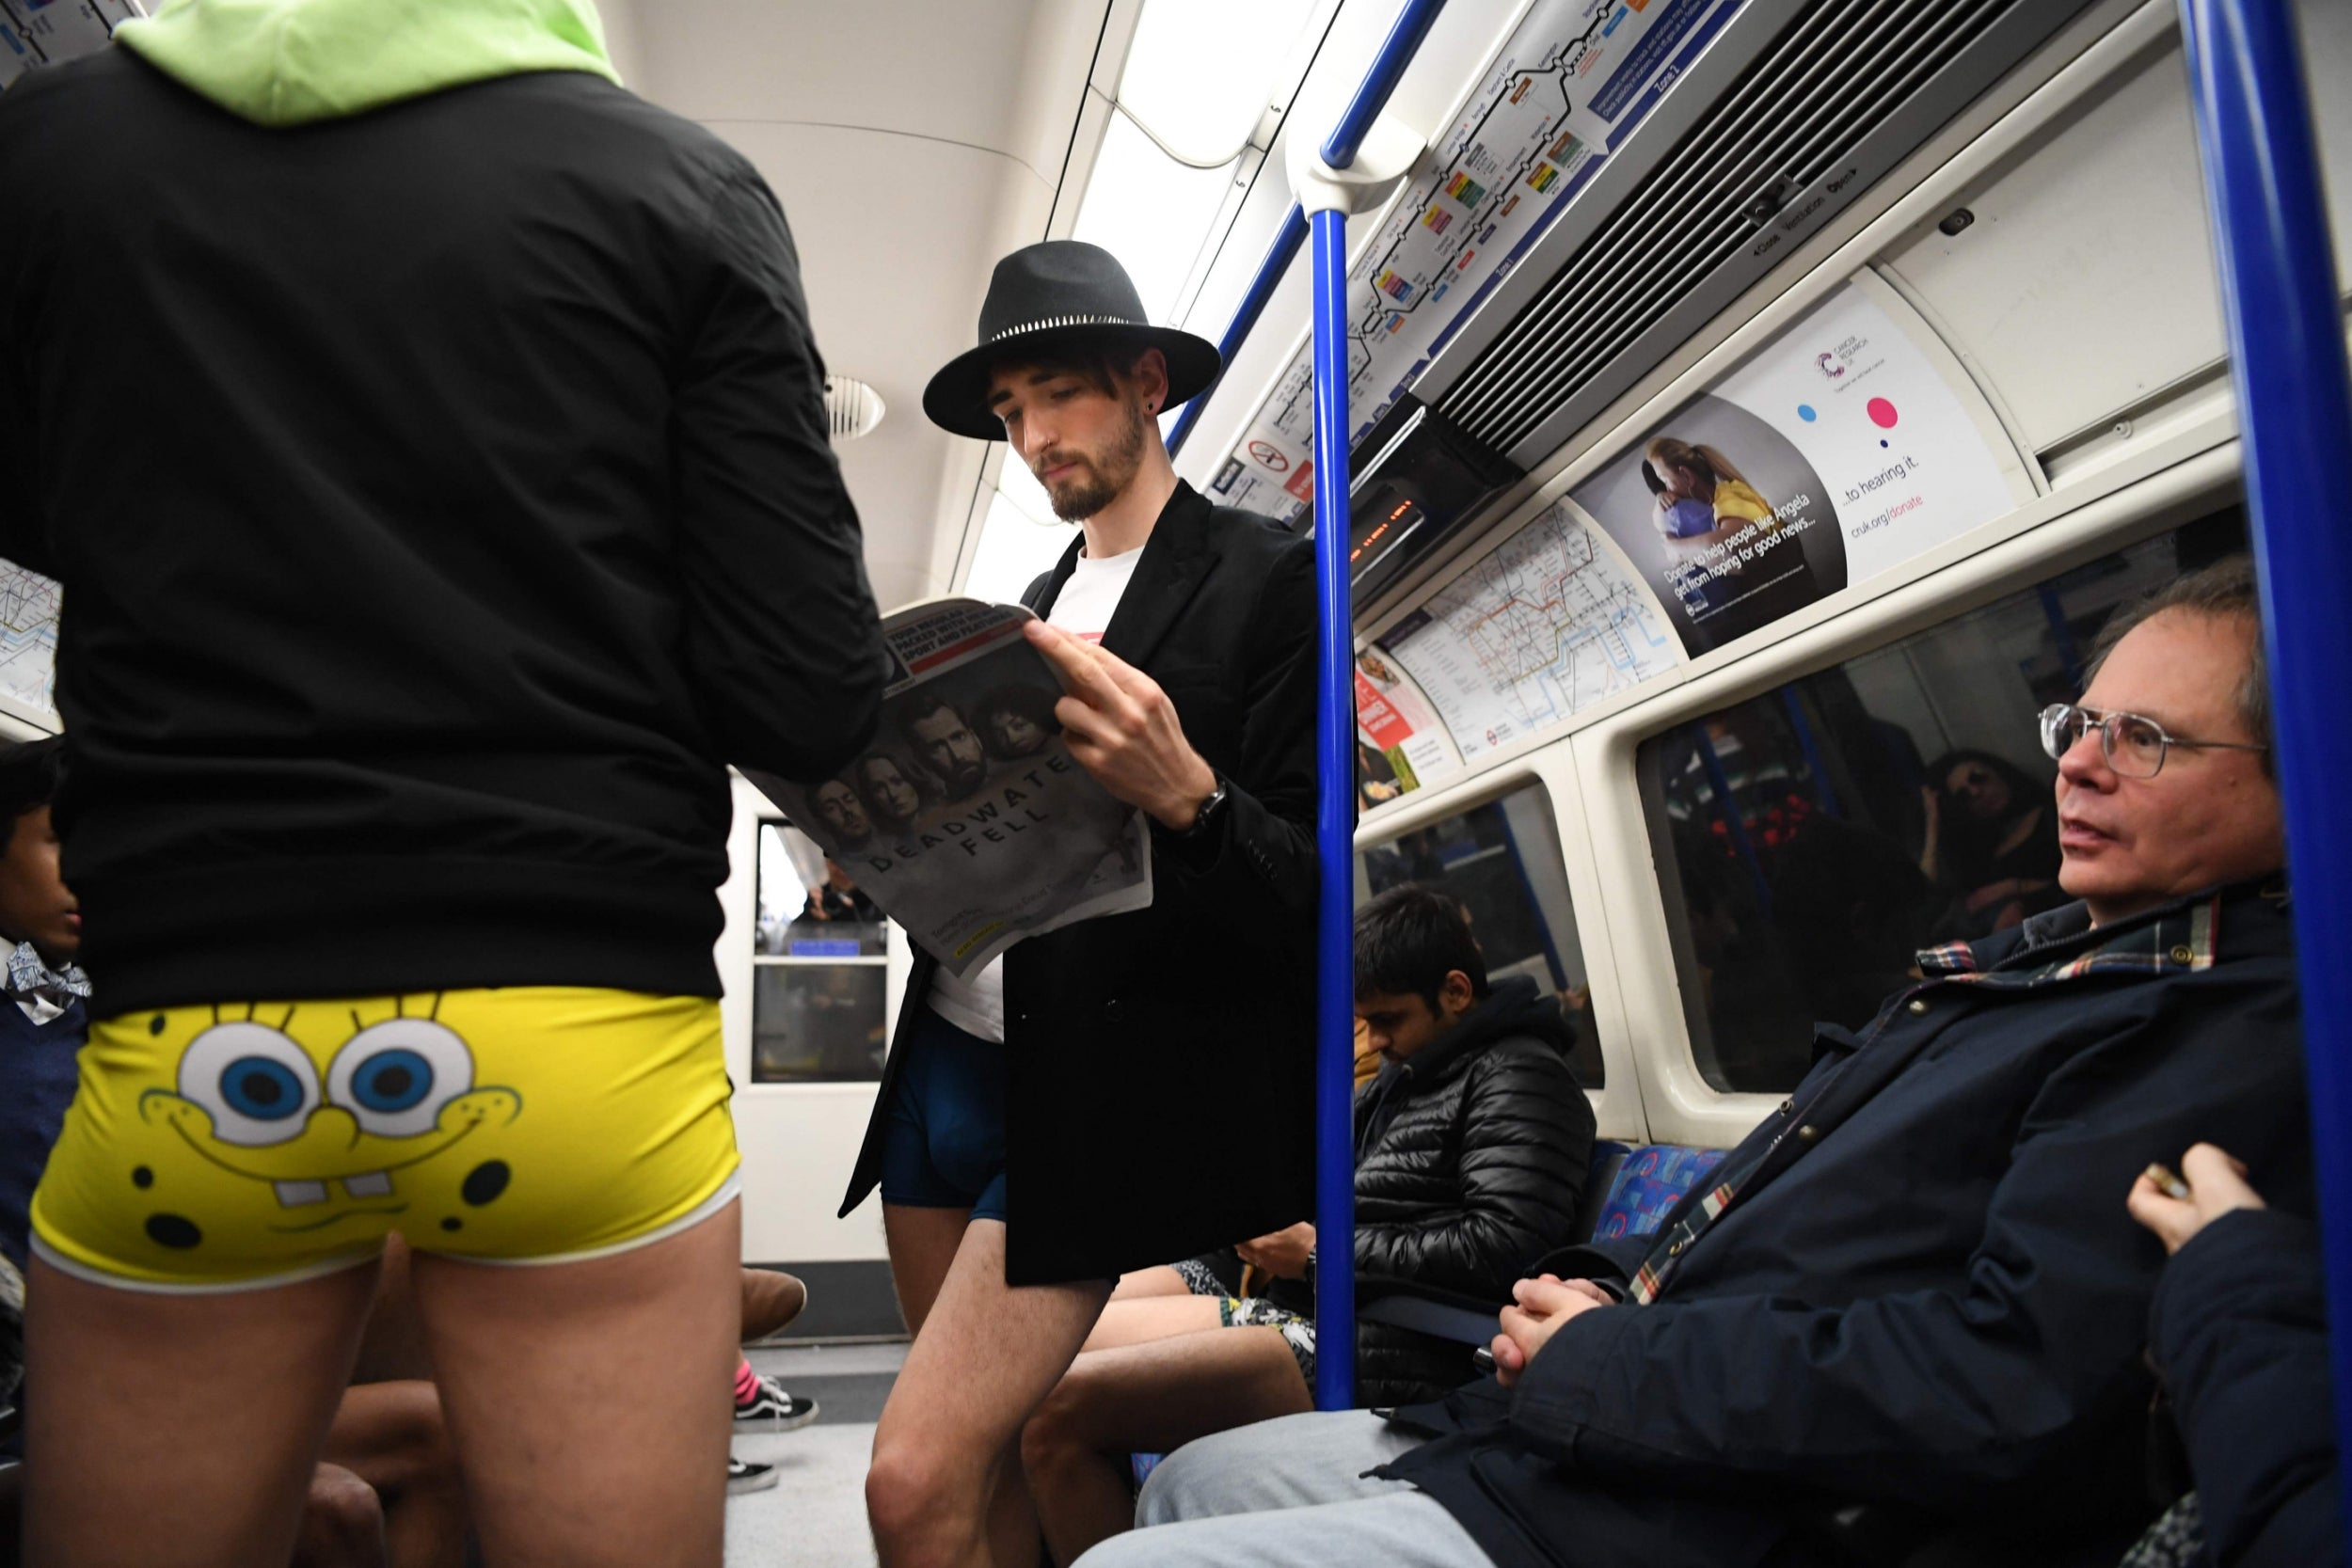 No Trousers Tube Ride Passengers strip down to underwear on public transport in celebration of silliness The Independent The Independent image